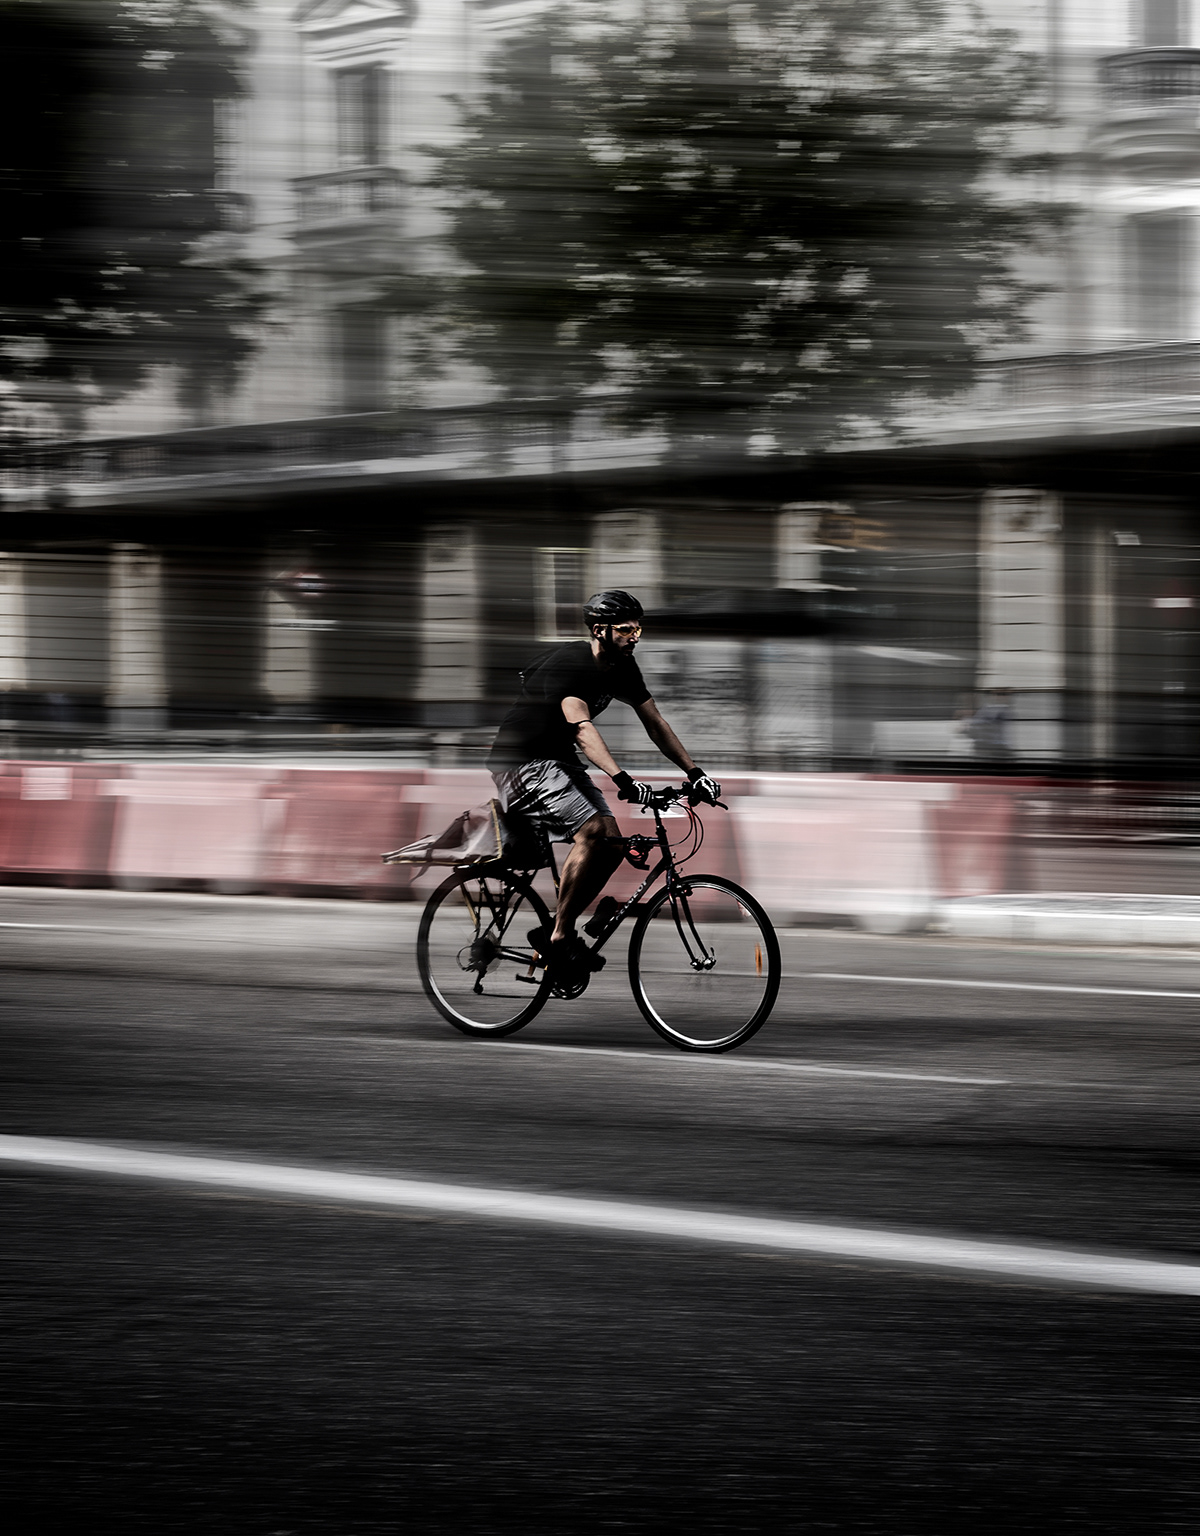 Bicycle Bike Cycling street photography city Urban Street people Travel Photography 